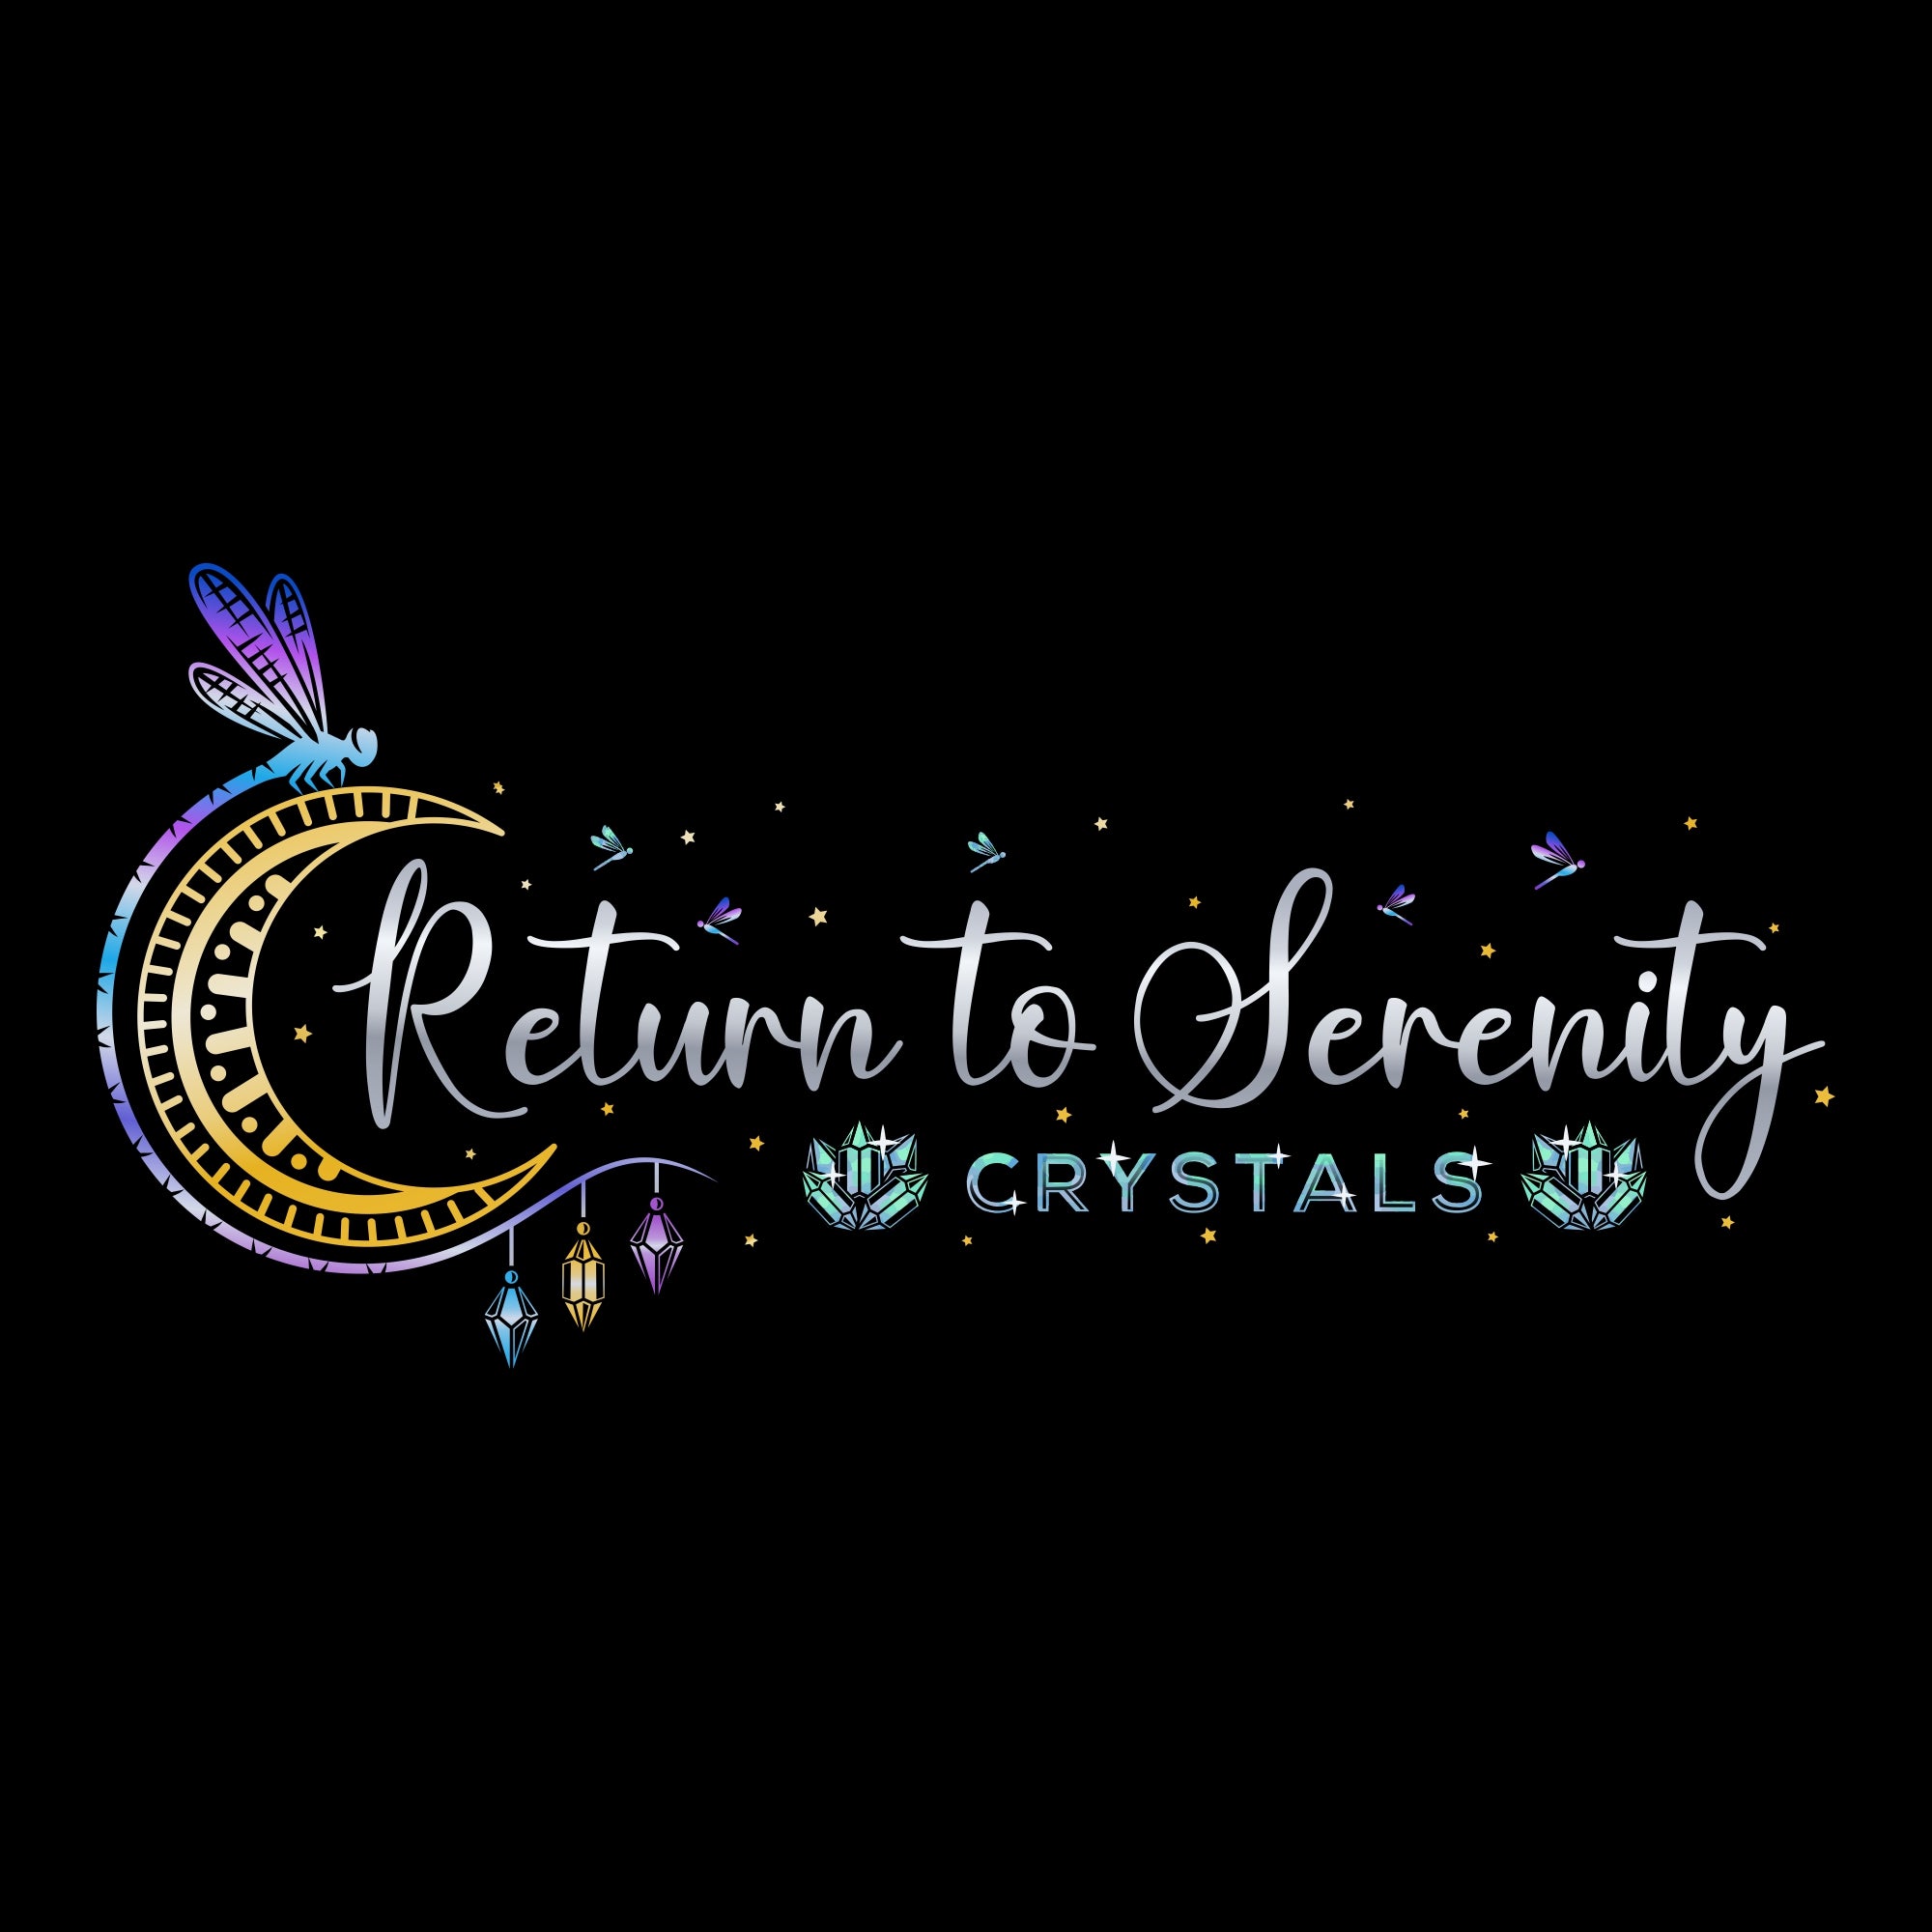 Return To Serenity Crystals